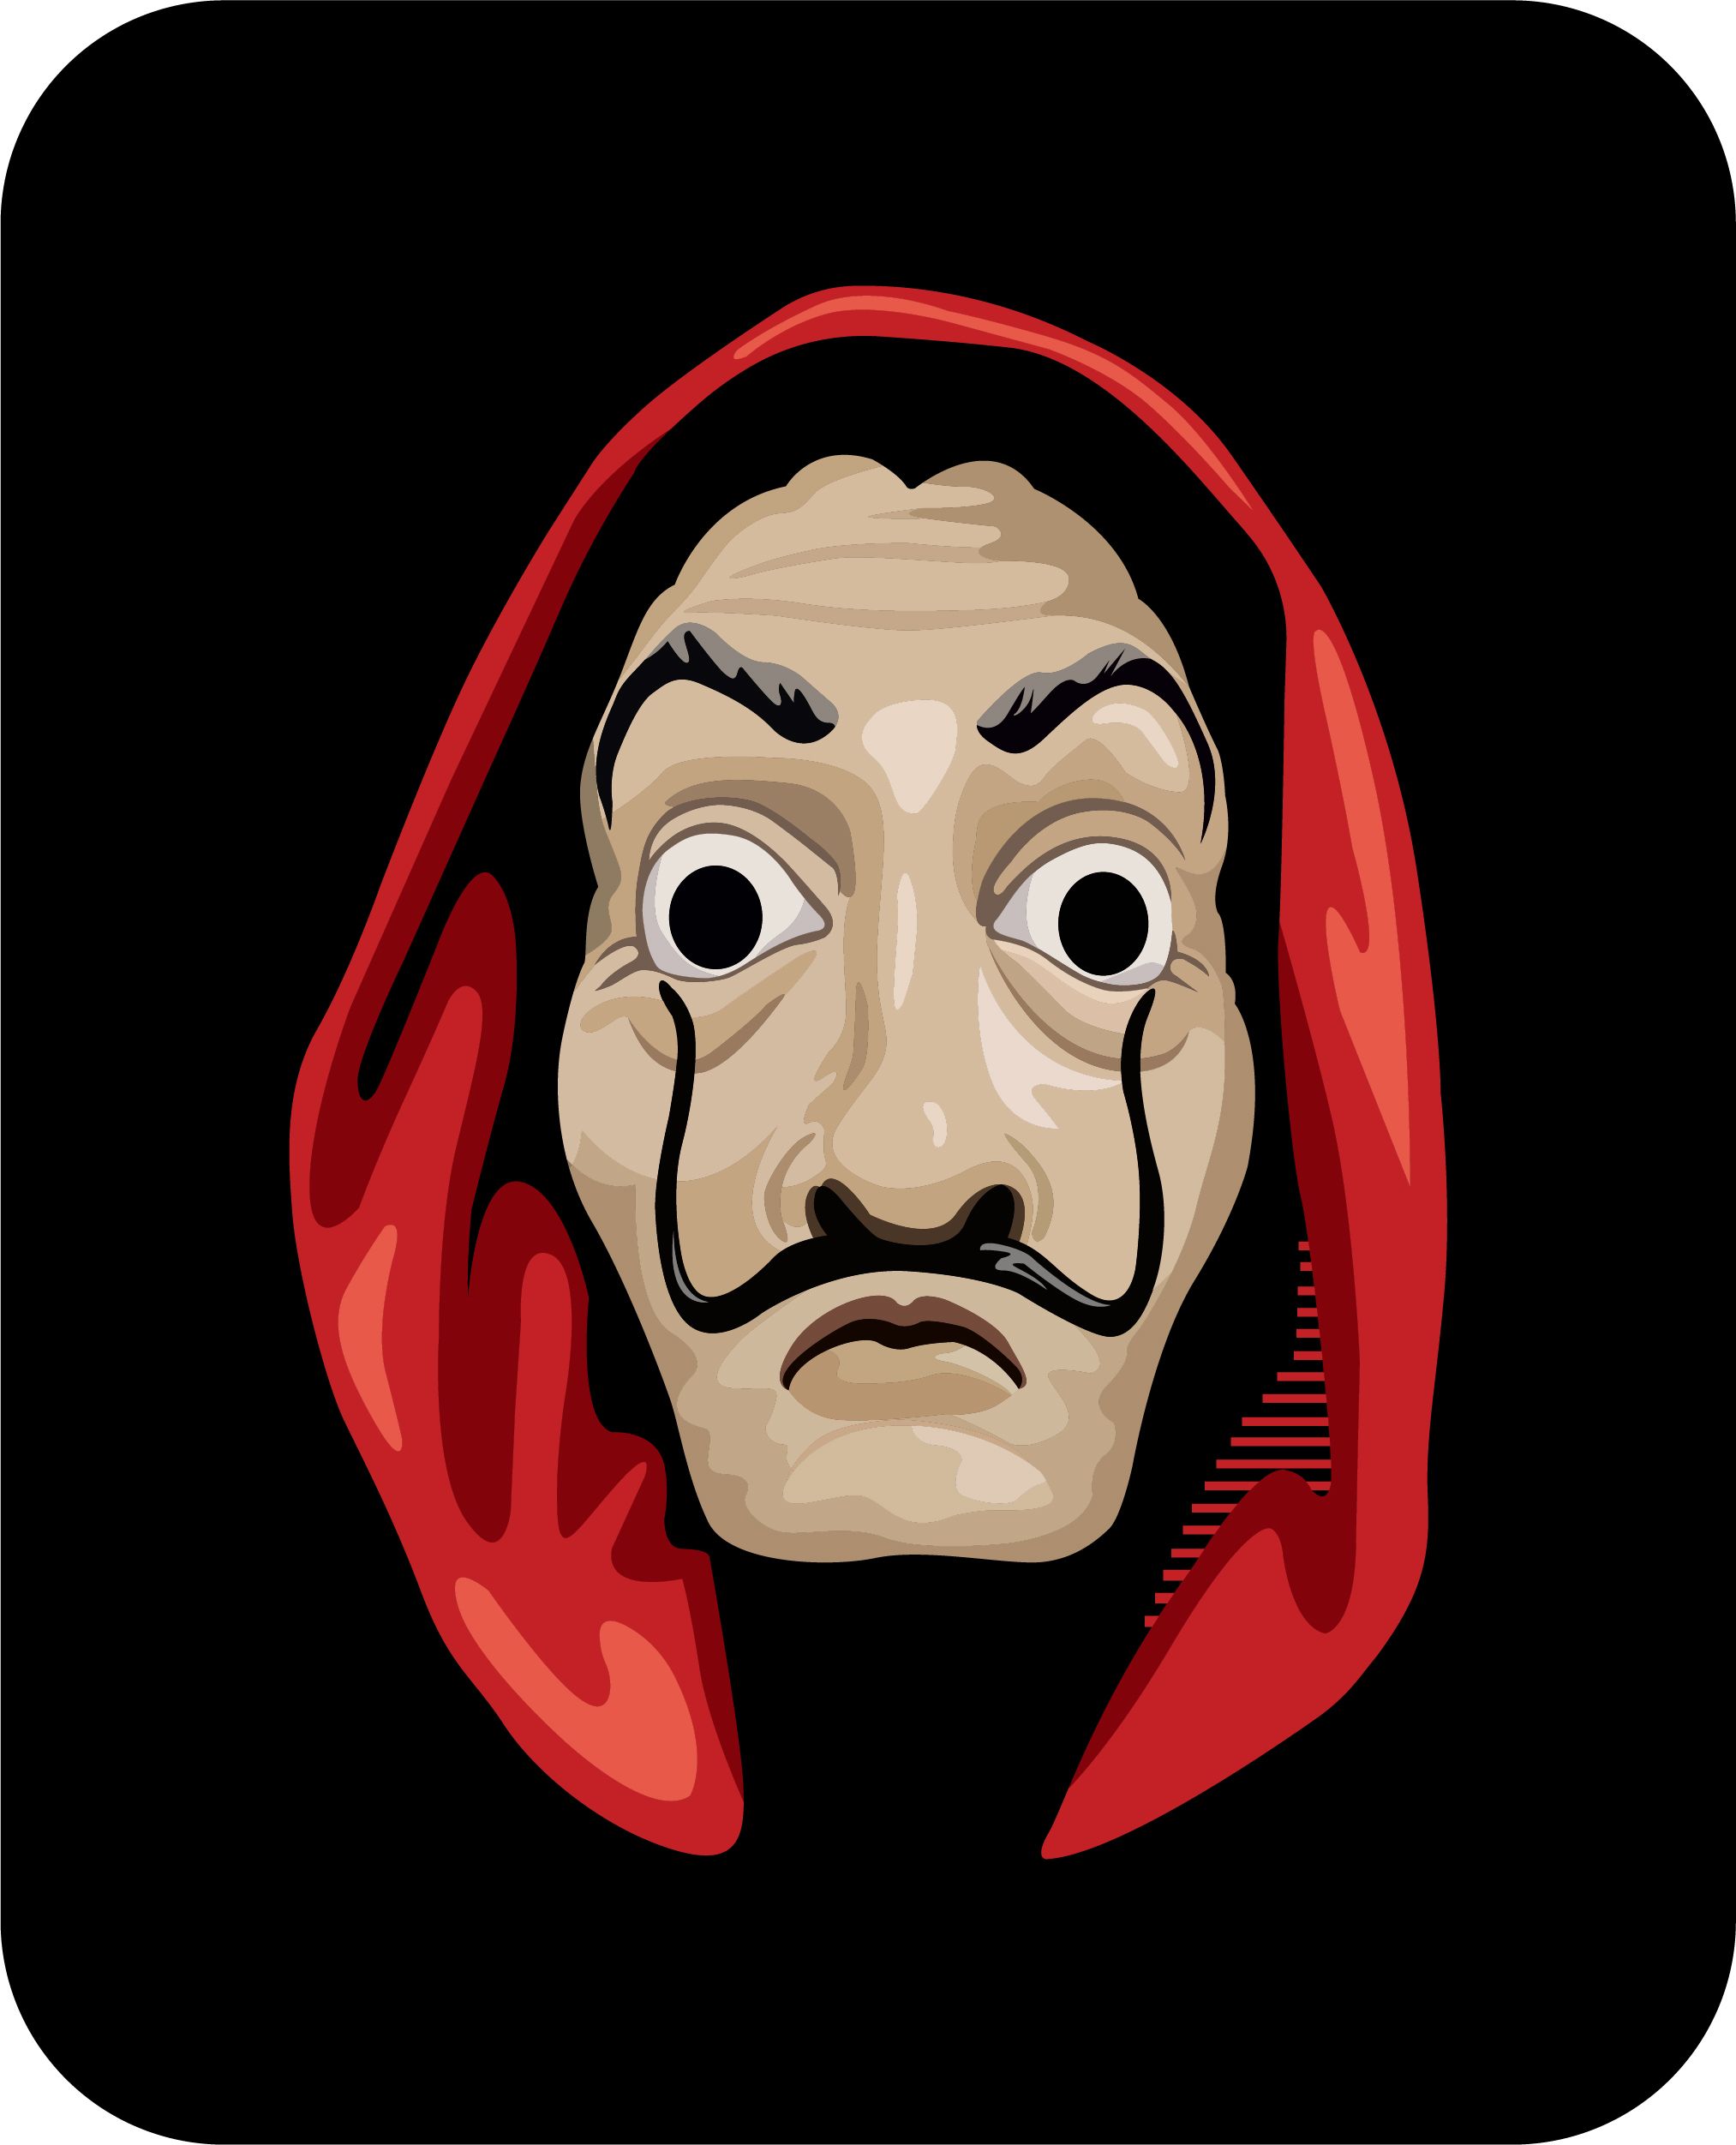 Money Heist Mask T Shirt. Free Download. Mask drawing, Space phone wallpaper, Greys anatomy gifts